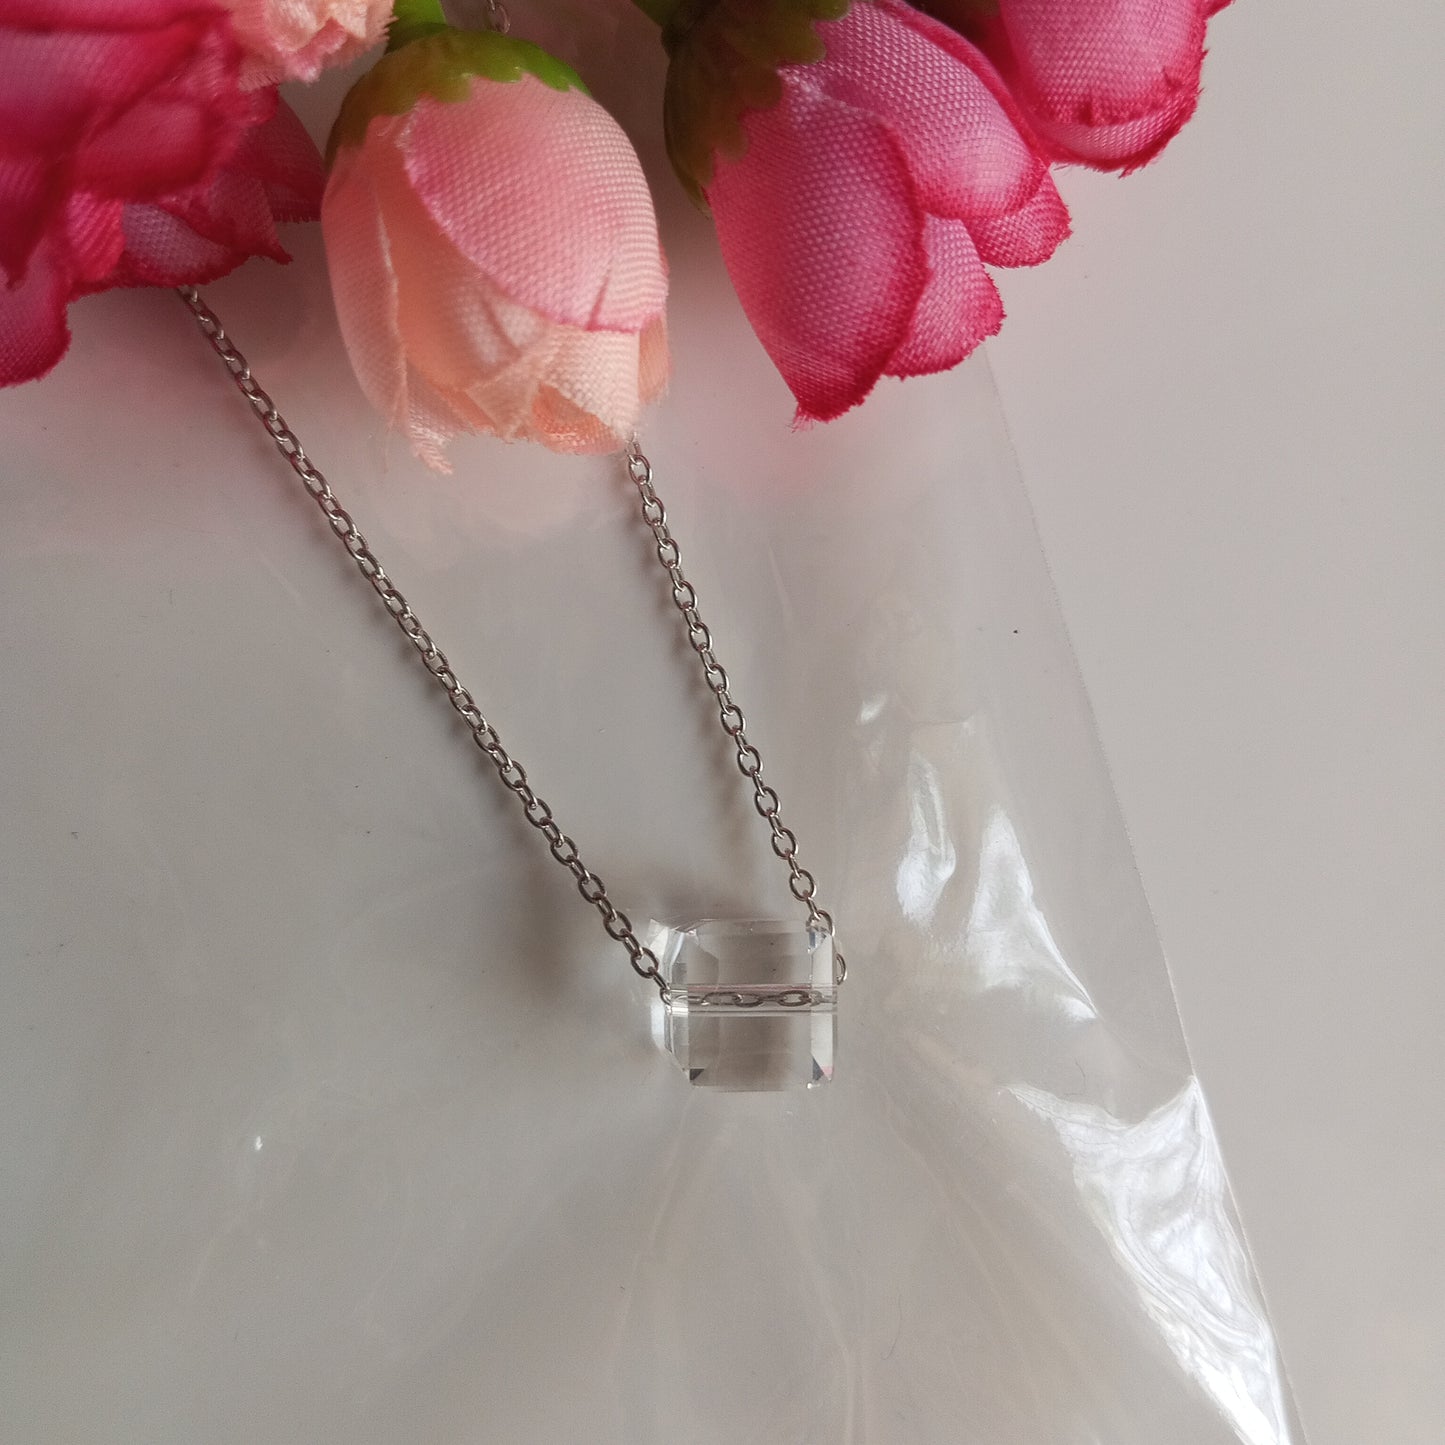 Silver Chain with Pendant- Transparent Stone